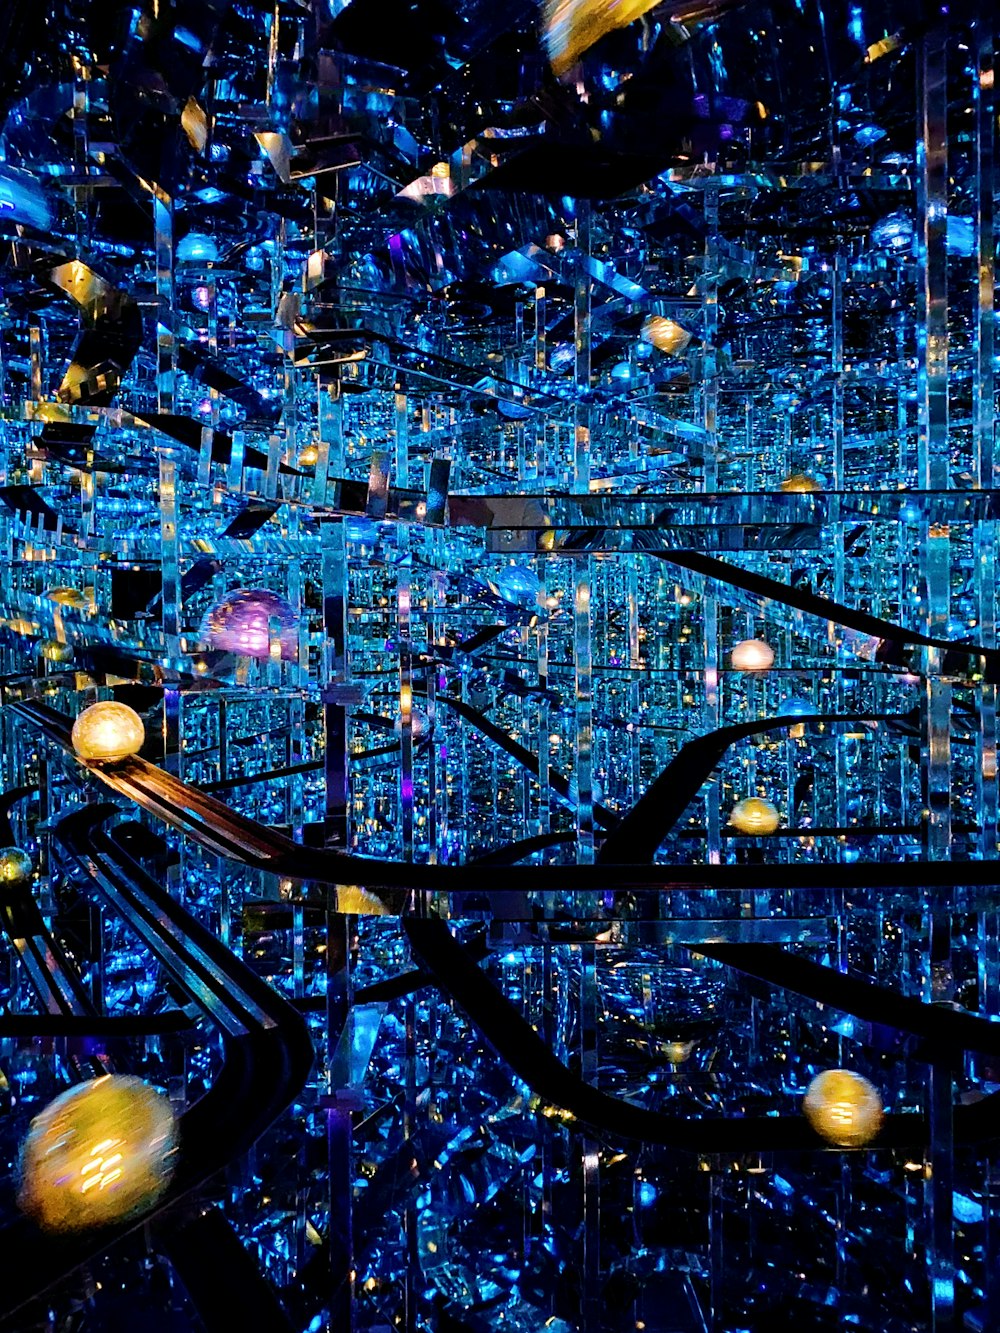 a very large city filled with lots of blue lights